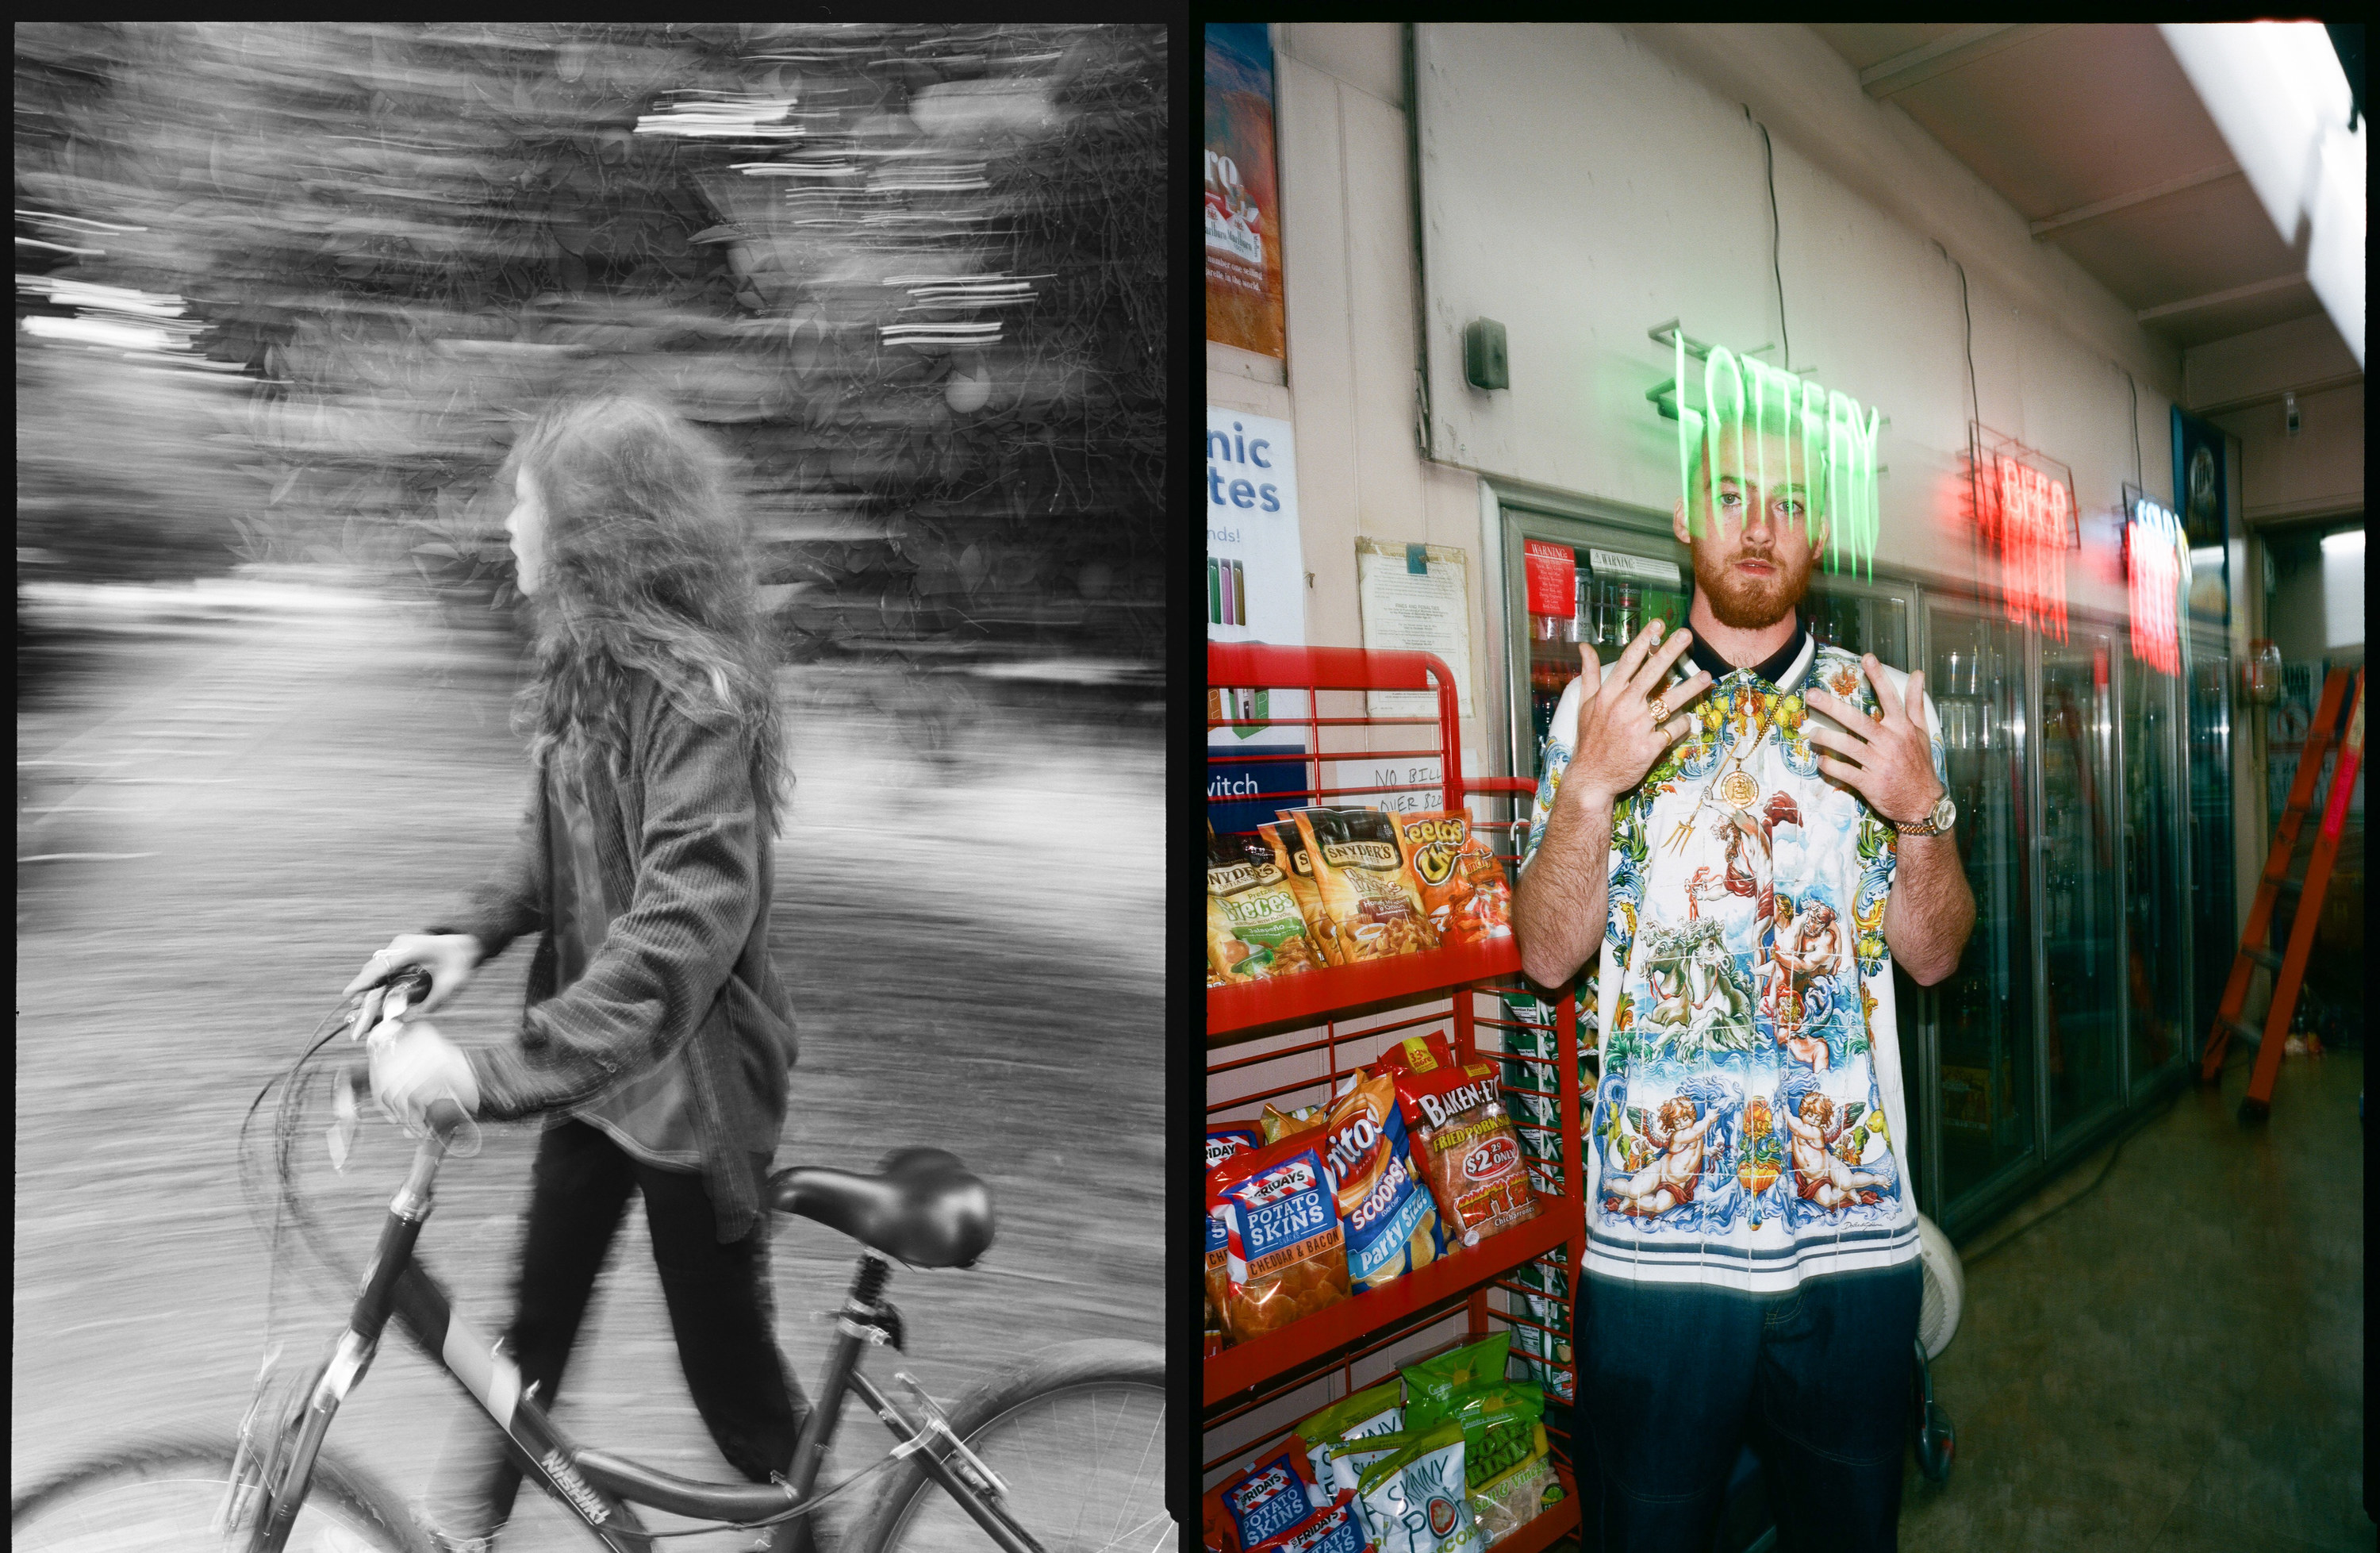 Left, Zendaya who plays Rue walking a bicycle, and right, Angus Cloud who plays Fezco in a convenience store on set